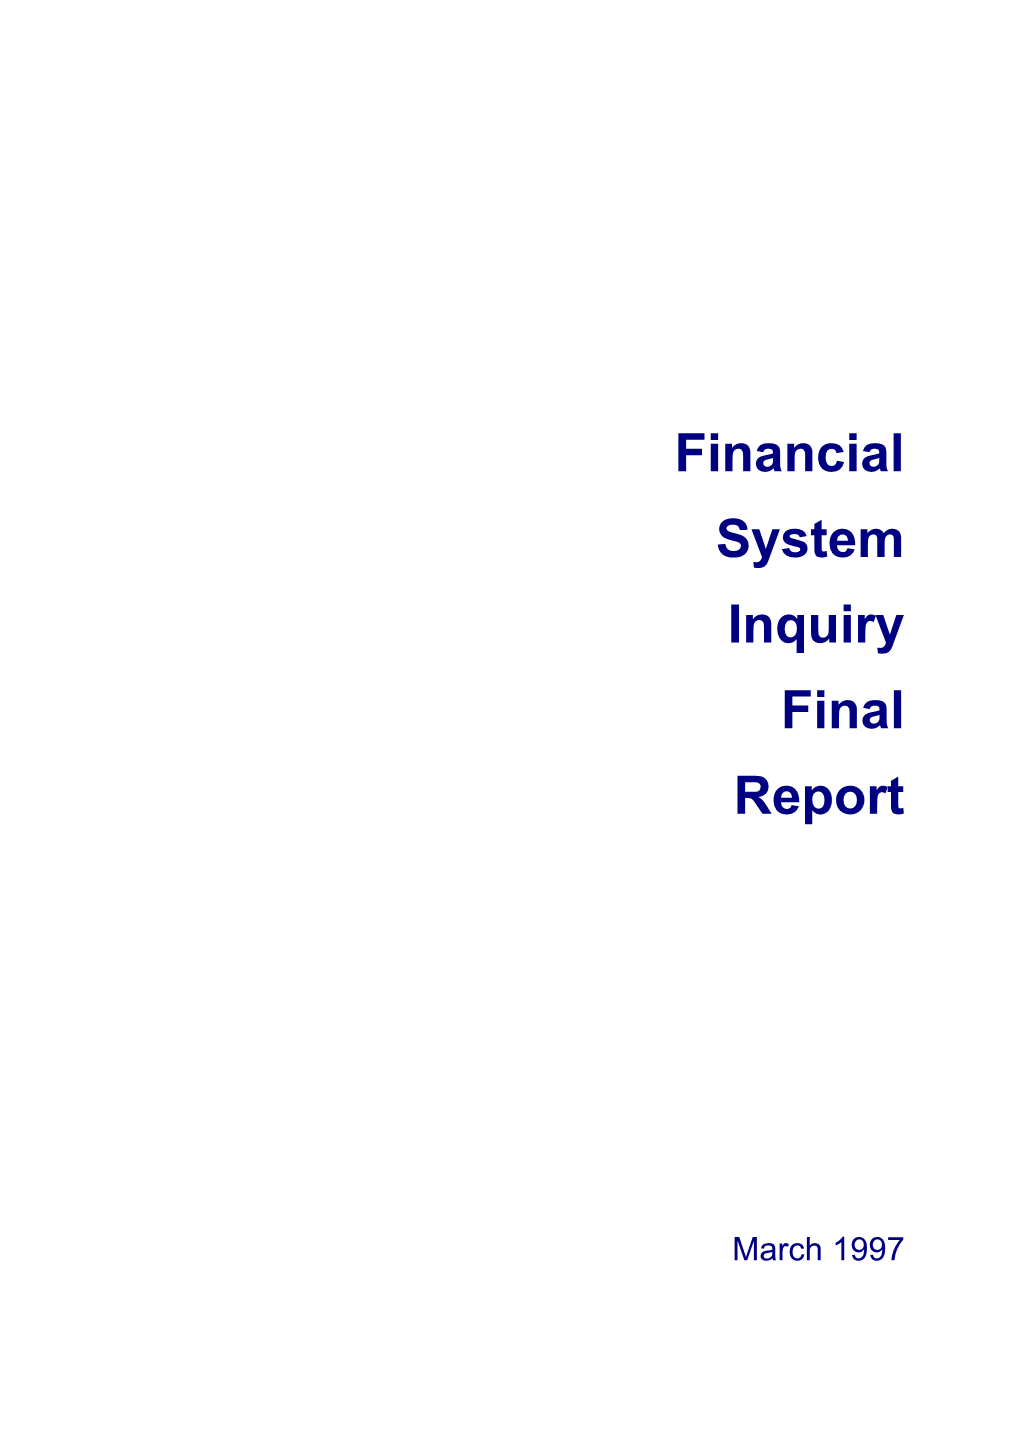 Financial System Inquiry (Wallis Report) - Final Report Title